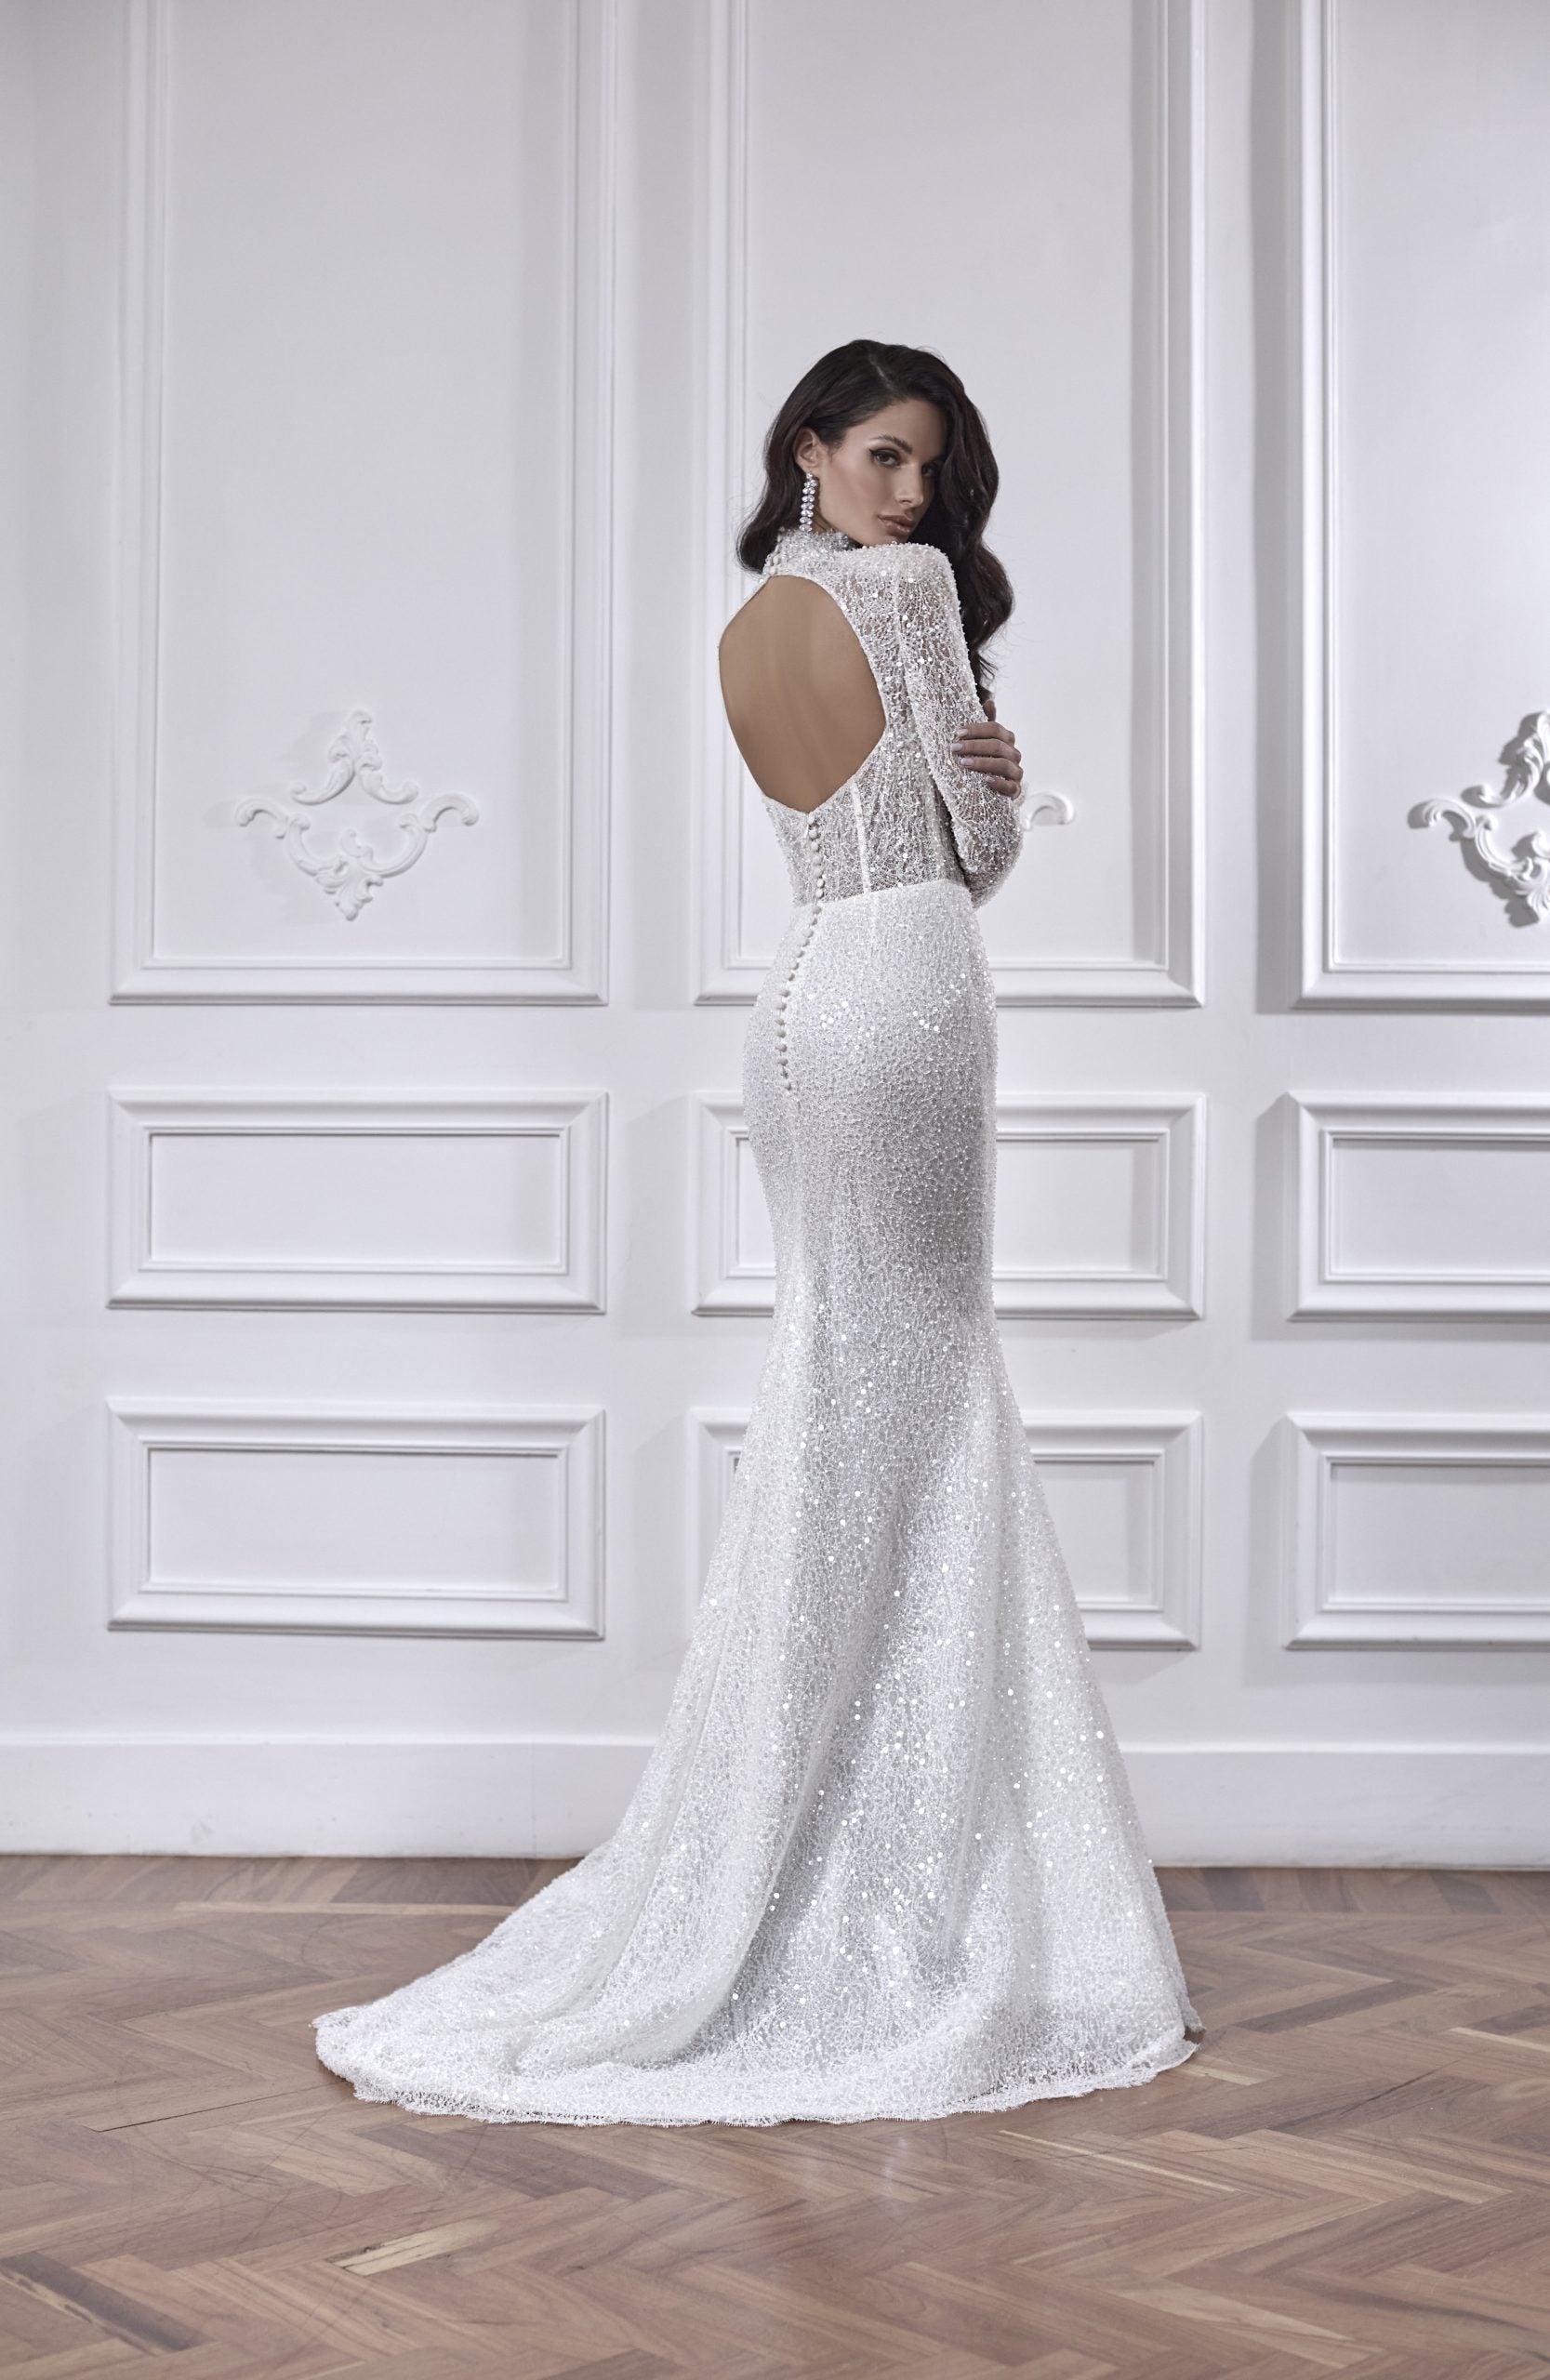 Long Sleeve Fit And Flare Wedding Dress With Detachable Overskirt by Maison Signore - Image 3